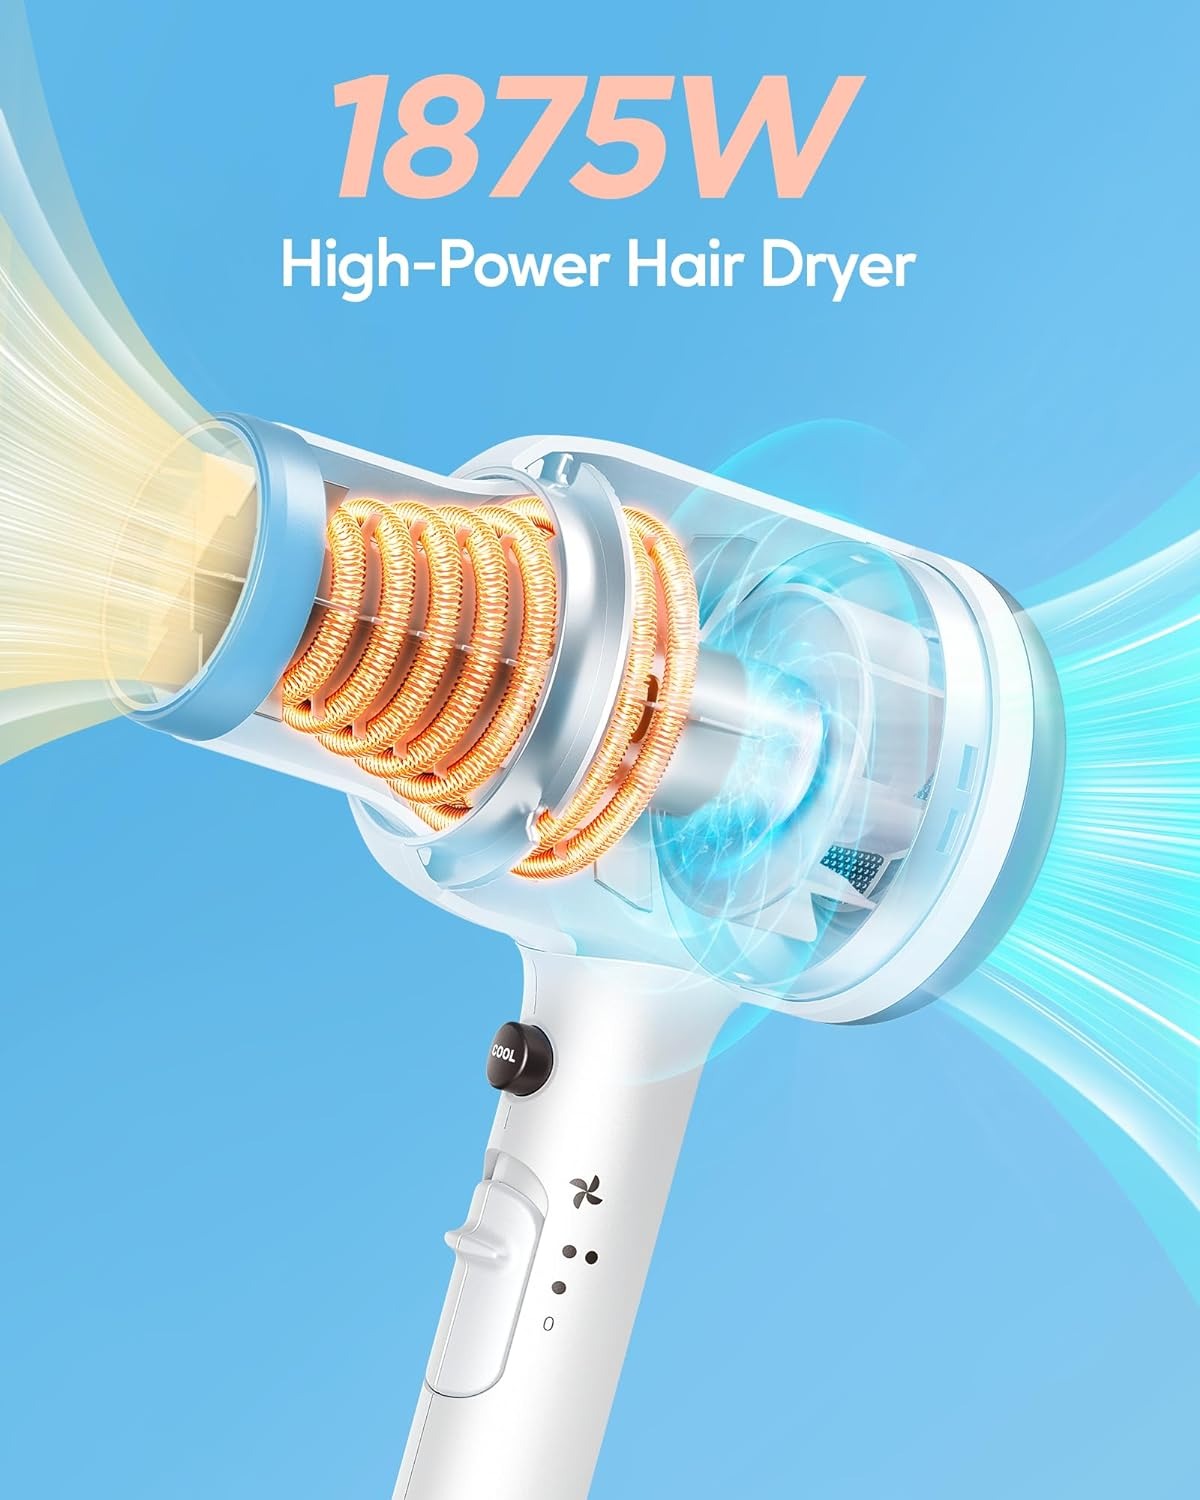 Professional Ionic Hair Dryer Blow Dryer with Diffuser and Concentrator for Curly Hair 1875 Watt Negative Ions Dryer with Ceramic Technology Nozzle for Fast Drying as Salon Light and Quiet